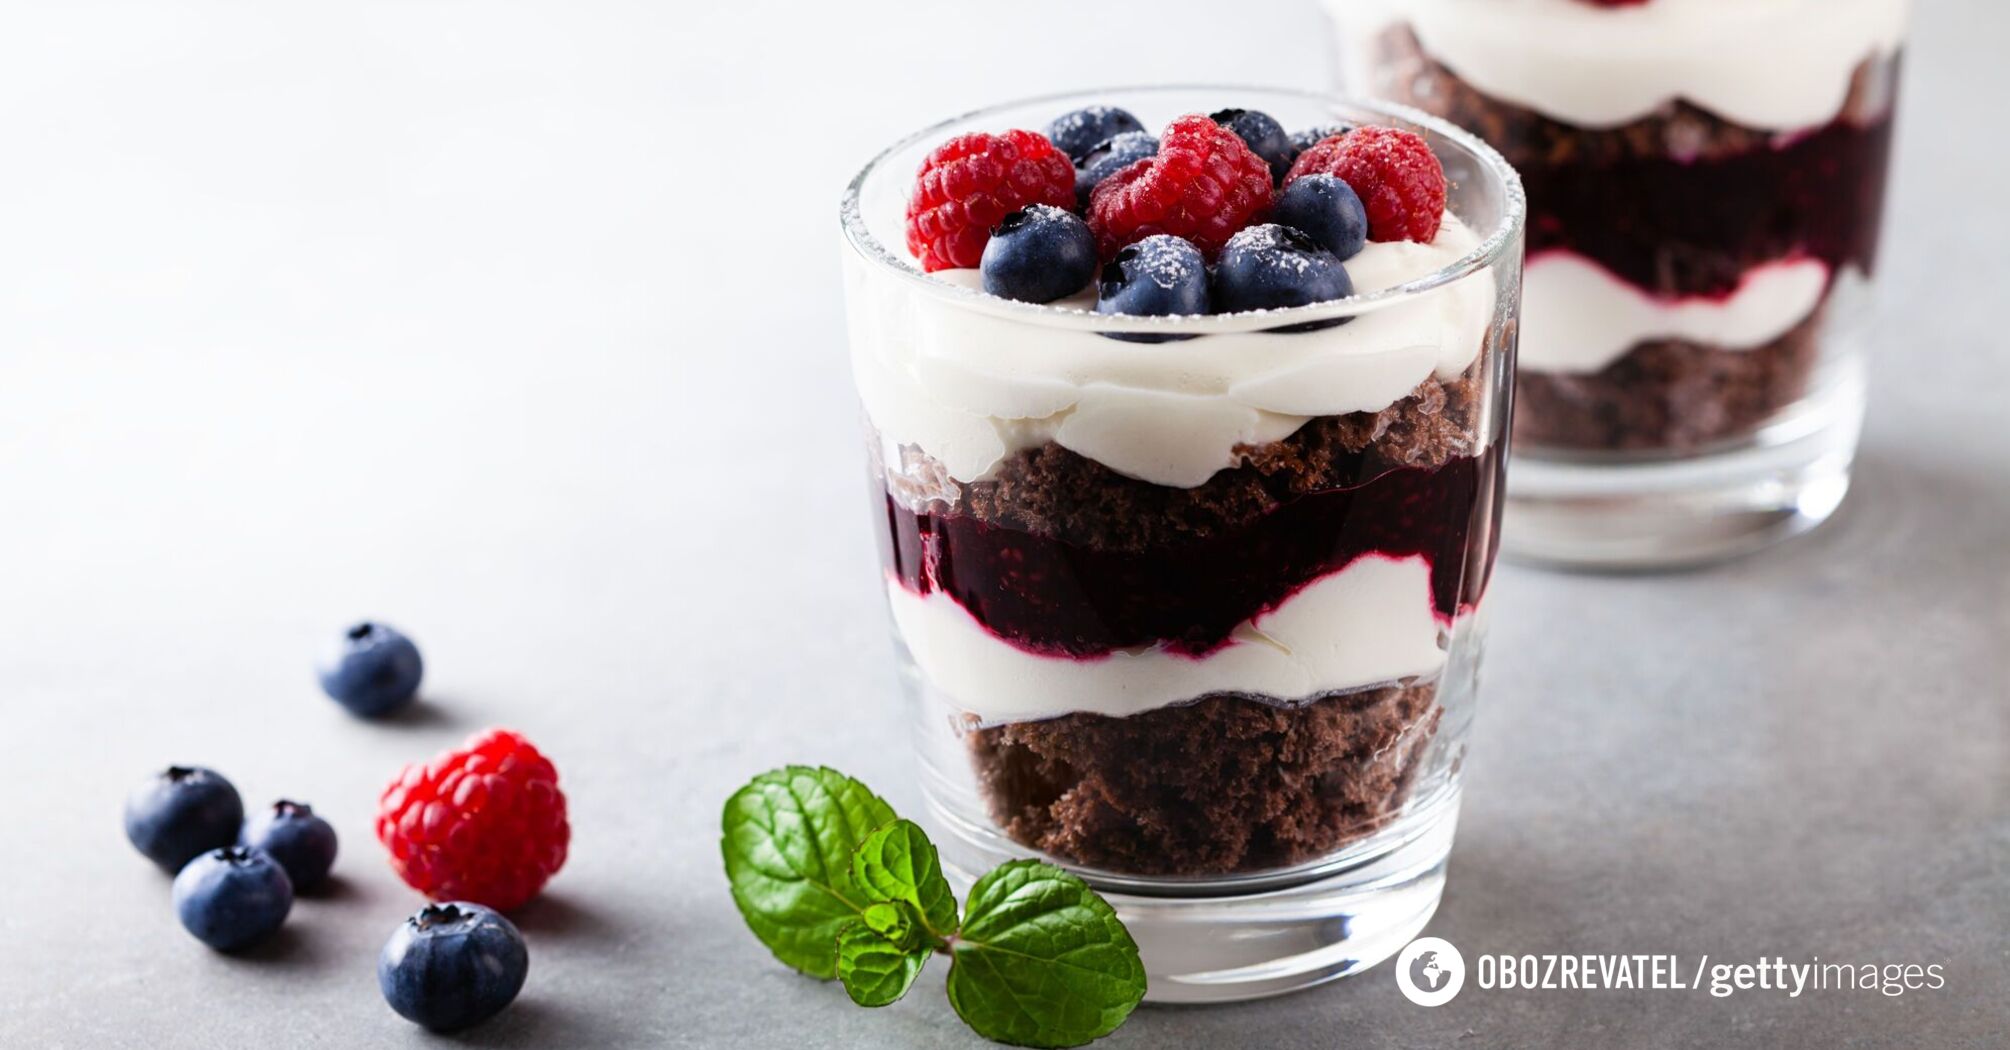 Chocolate trifle with berries